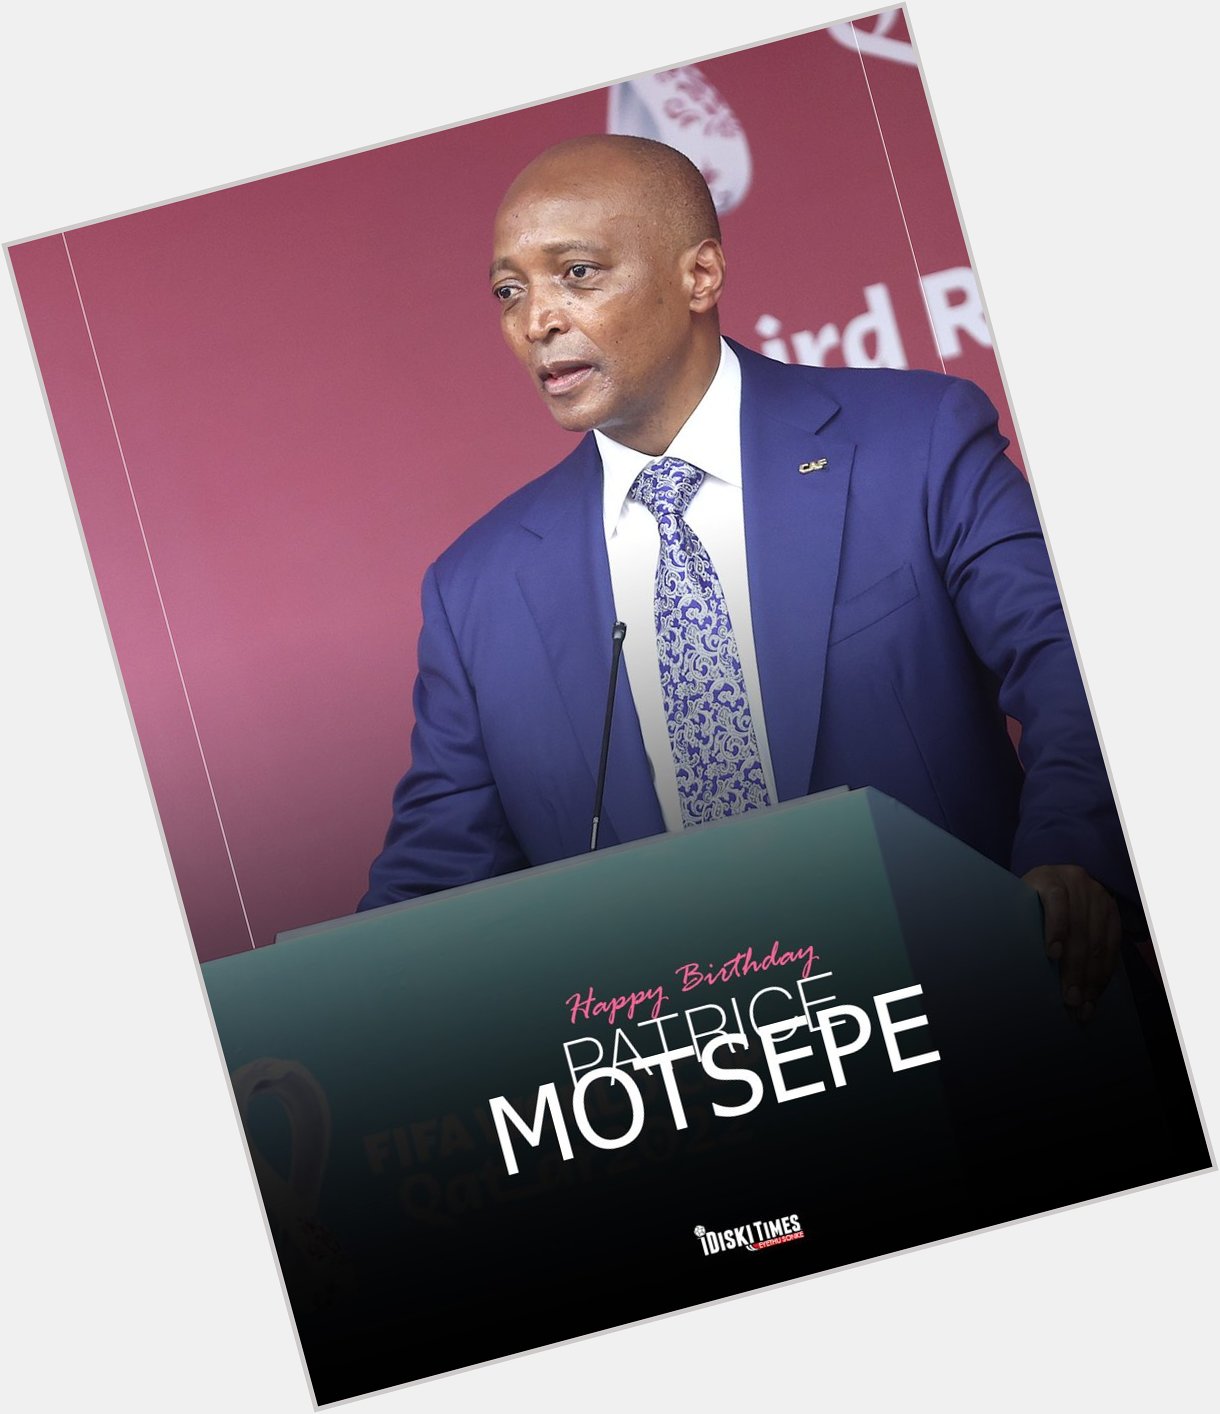 Join in wishing CAF president, Dr. Patrice Motsepe a happy birthday.  